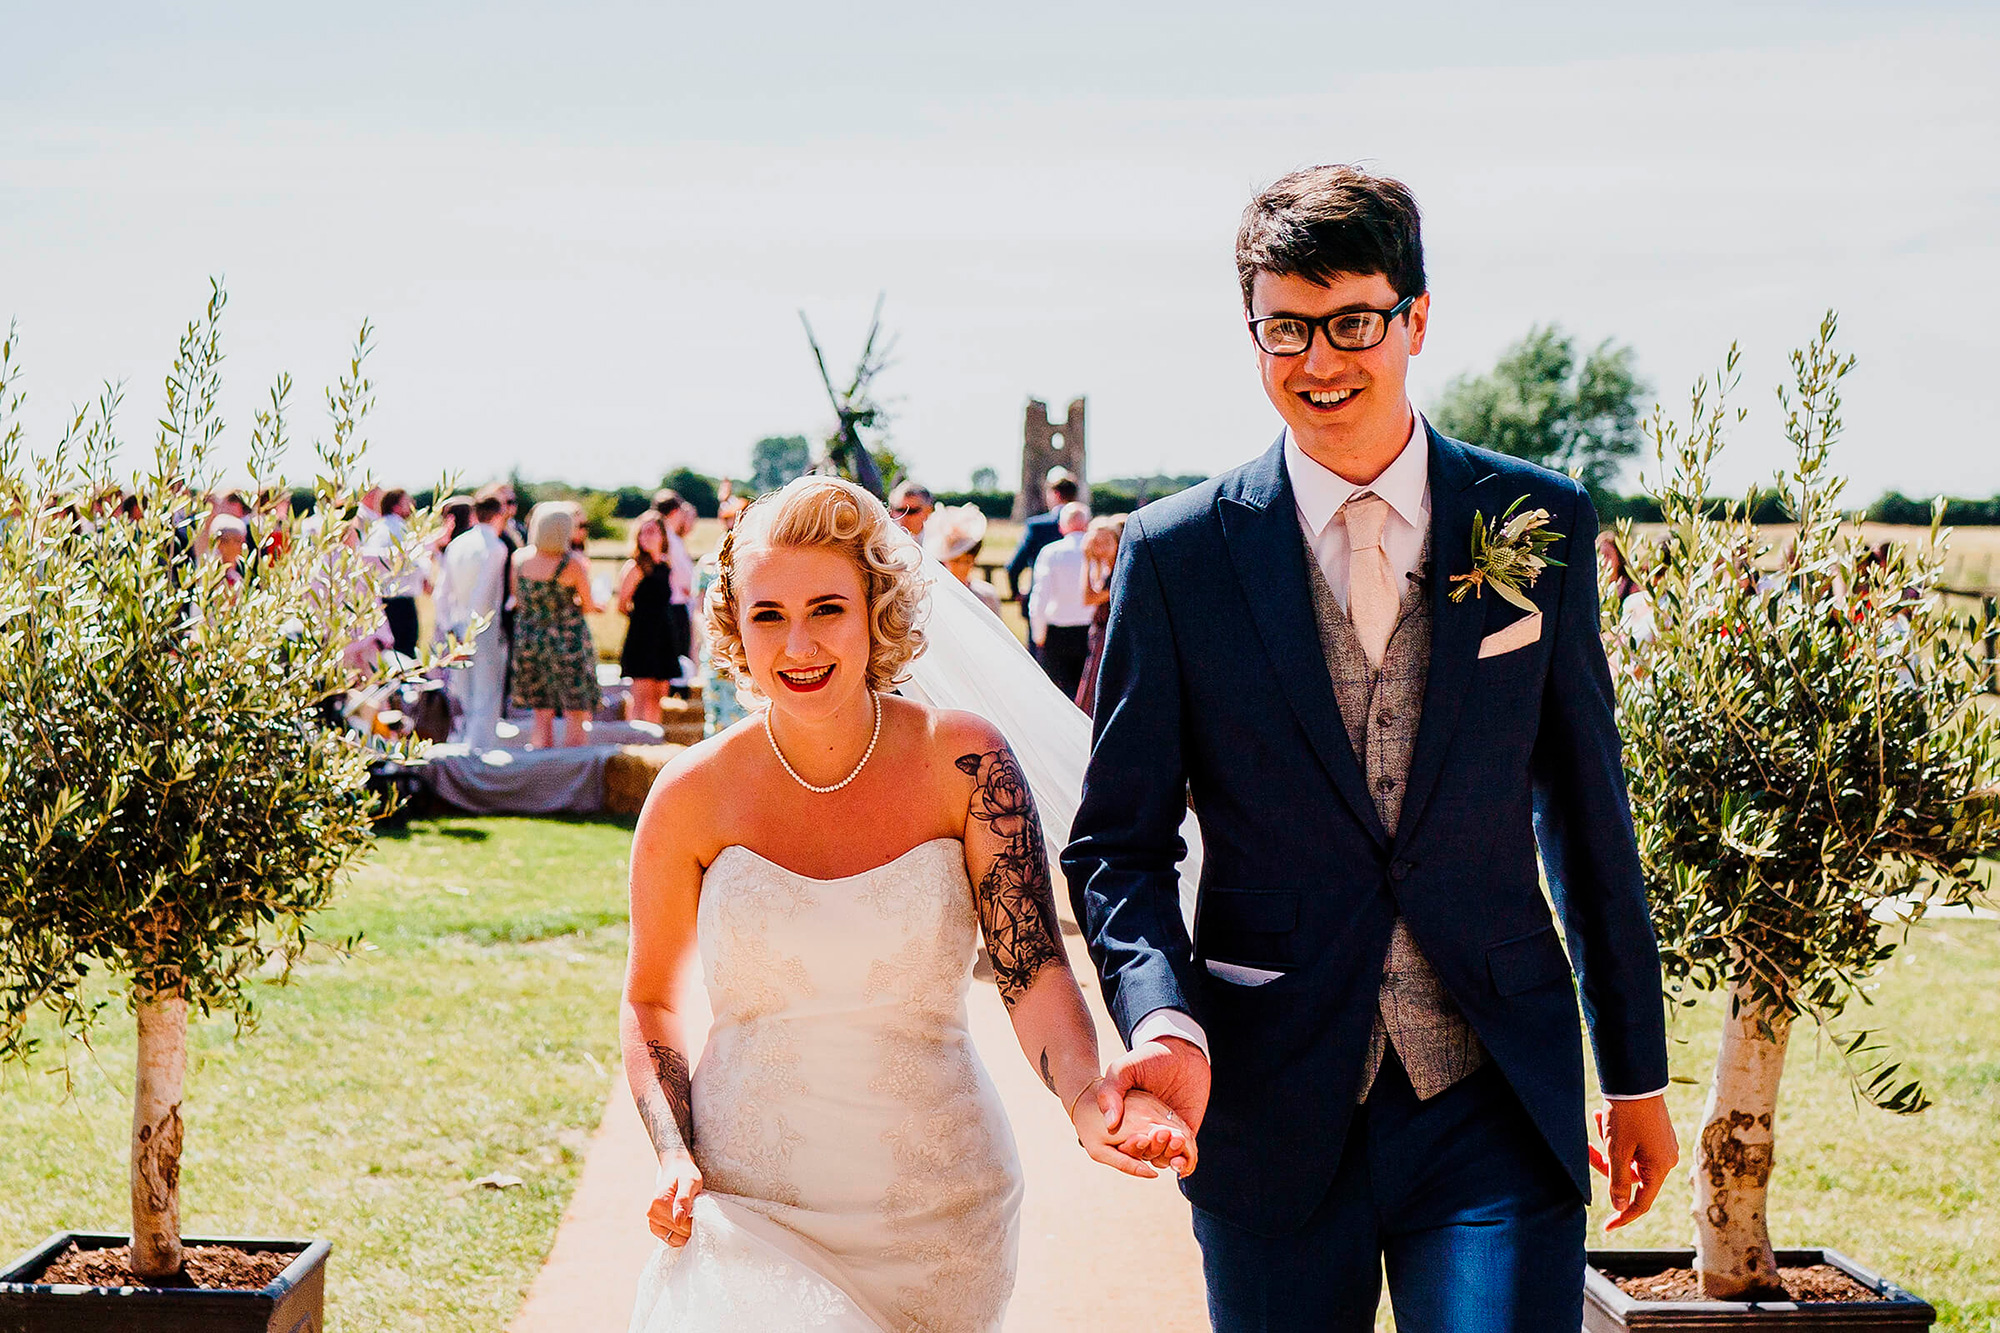 Lucy Simon Rustic Quirky Wedding Rob Dodsworth Photography 017